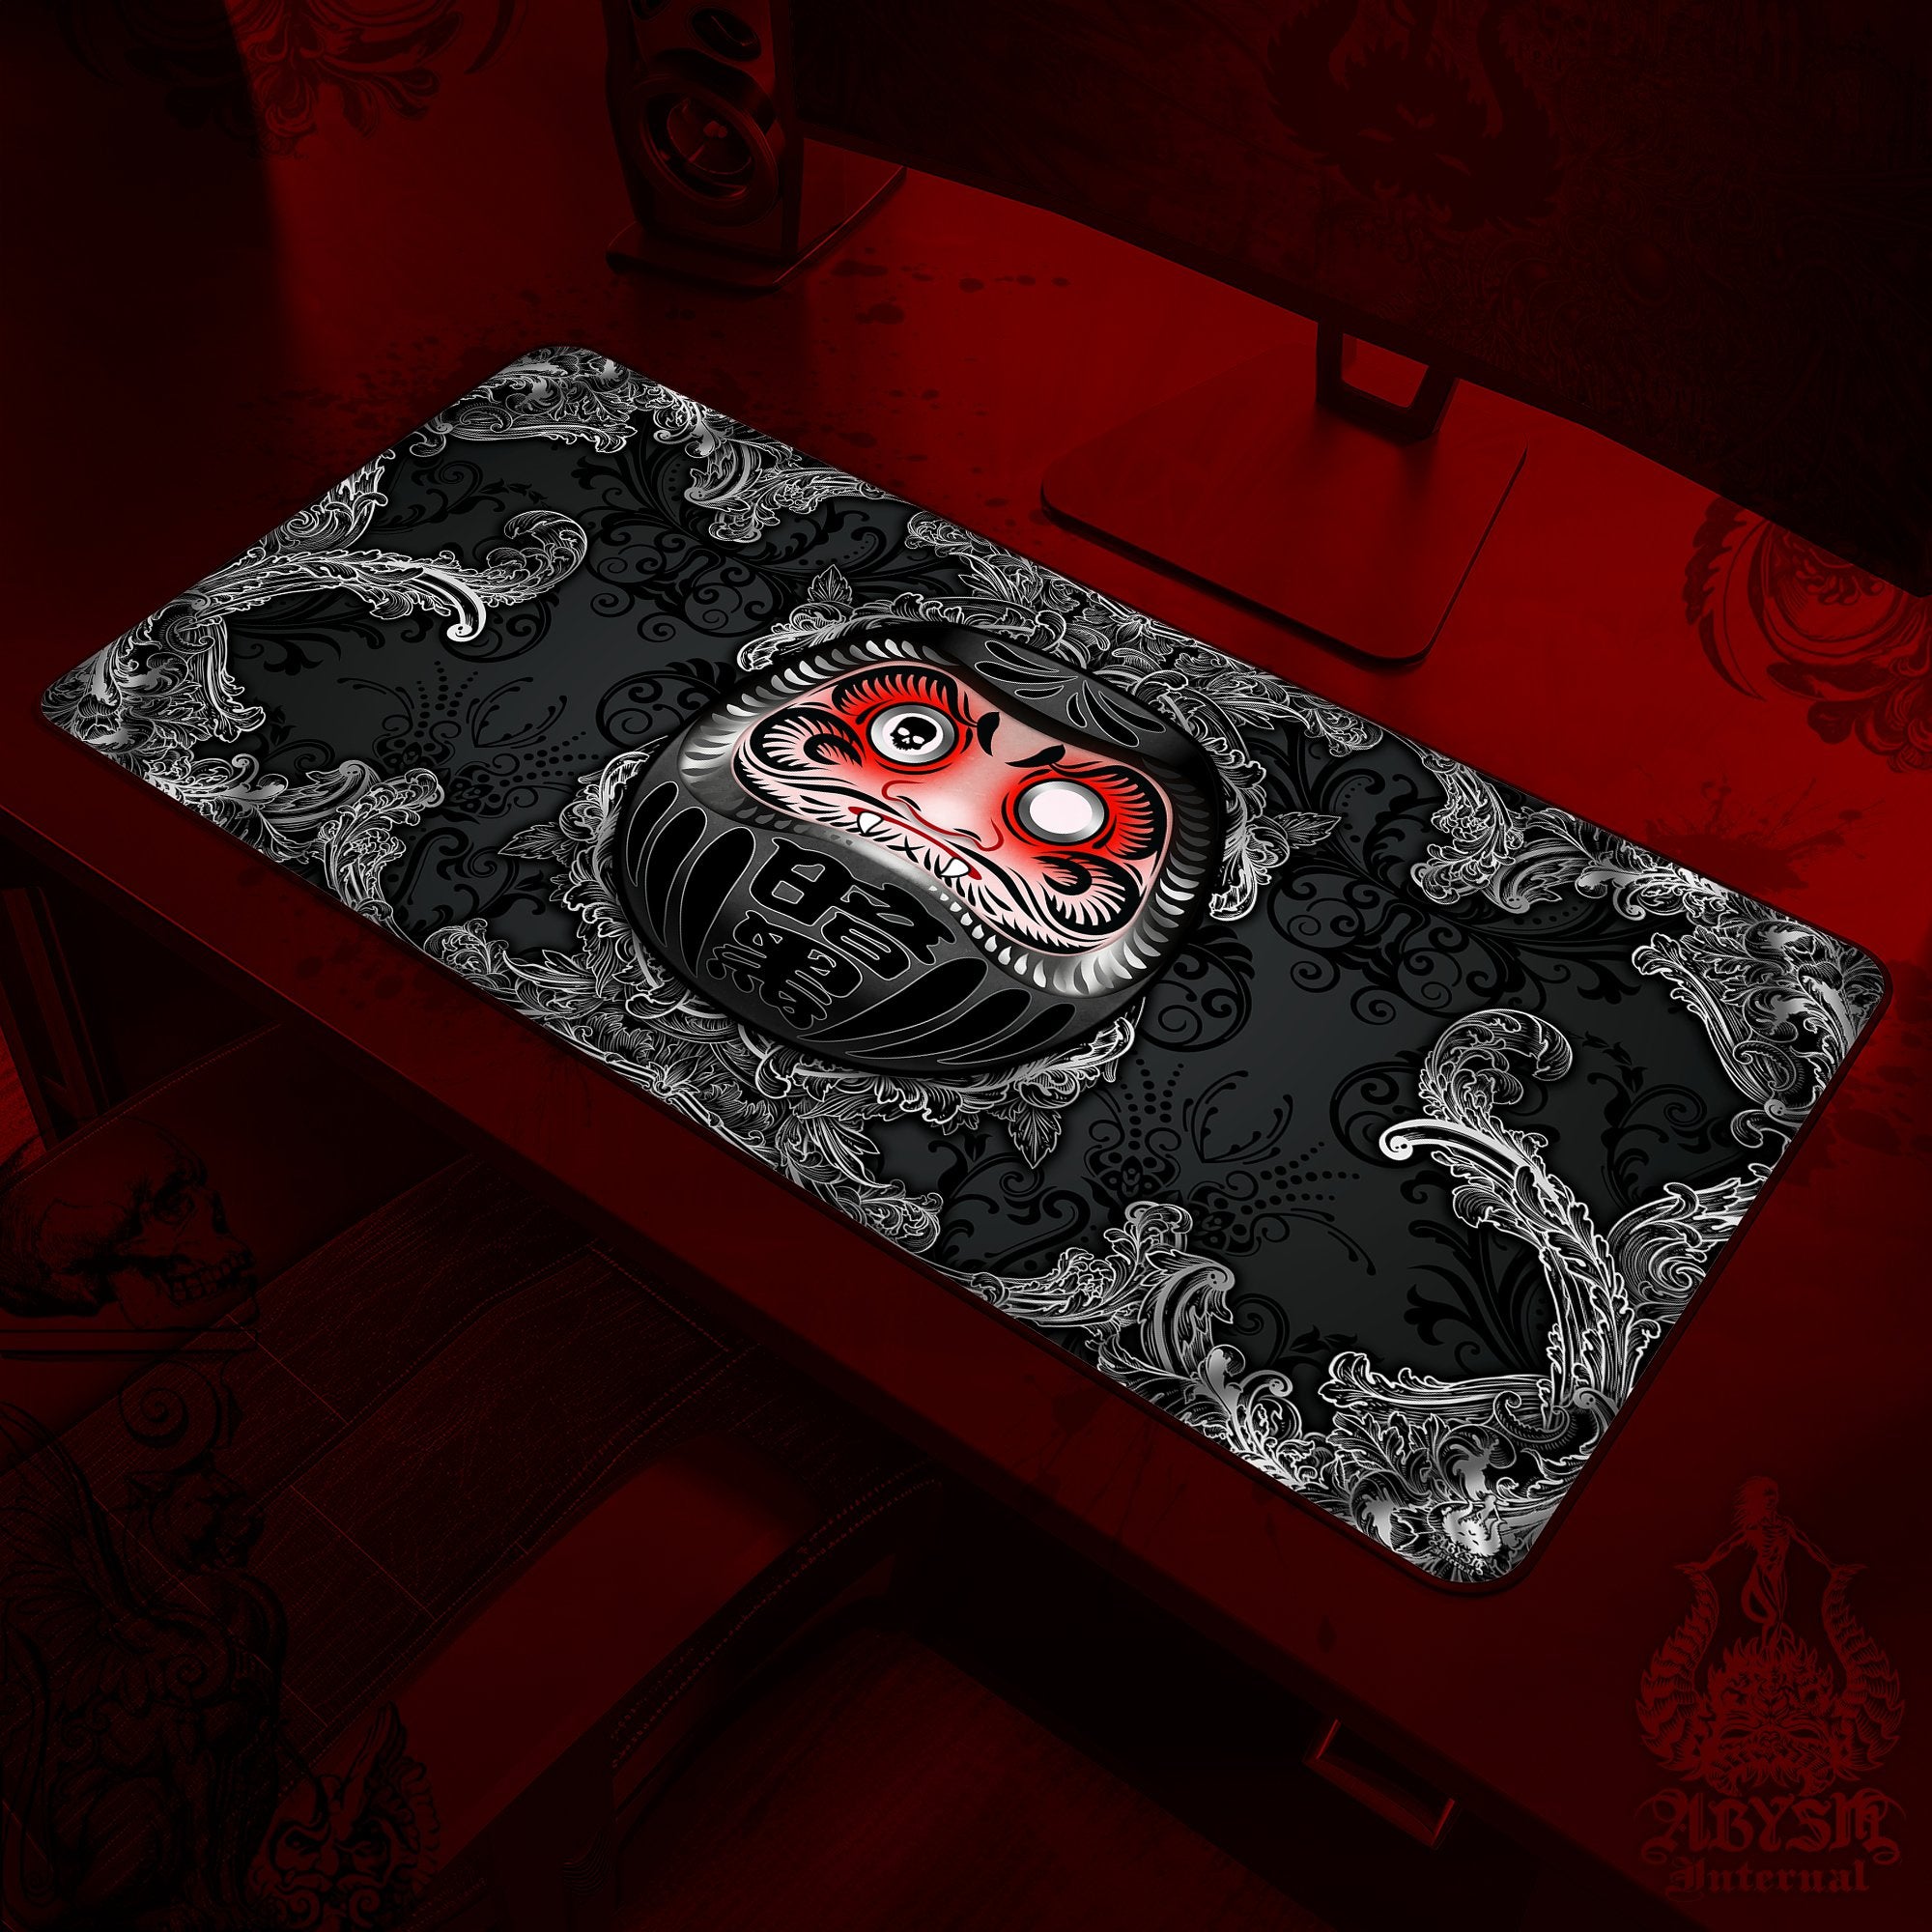 Gaming Desk Mat, Funny Daruma Mouse Pad, Gothic Table Protector Cover, Black Workpad, Dark Japanese Art Print - 2 Colors - Abysm Internal